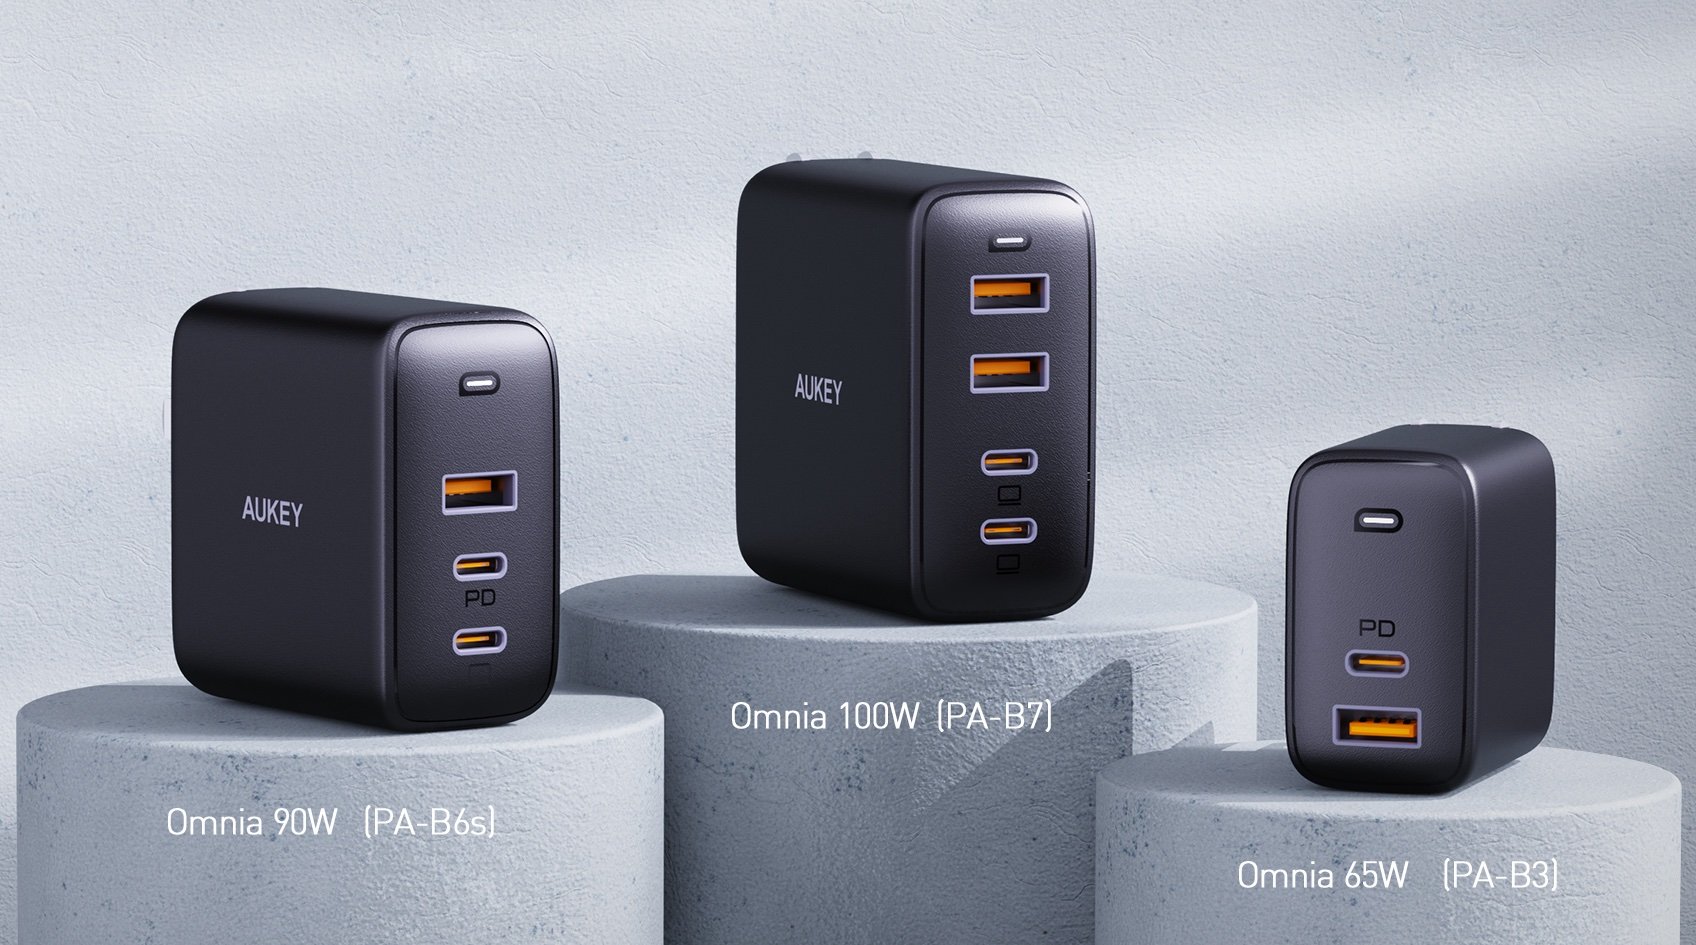 AUKEY's Omnia GaN charger gains new models 65W, 90W, | iMore